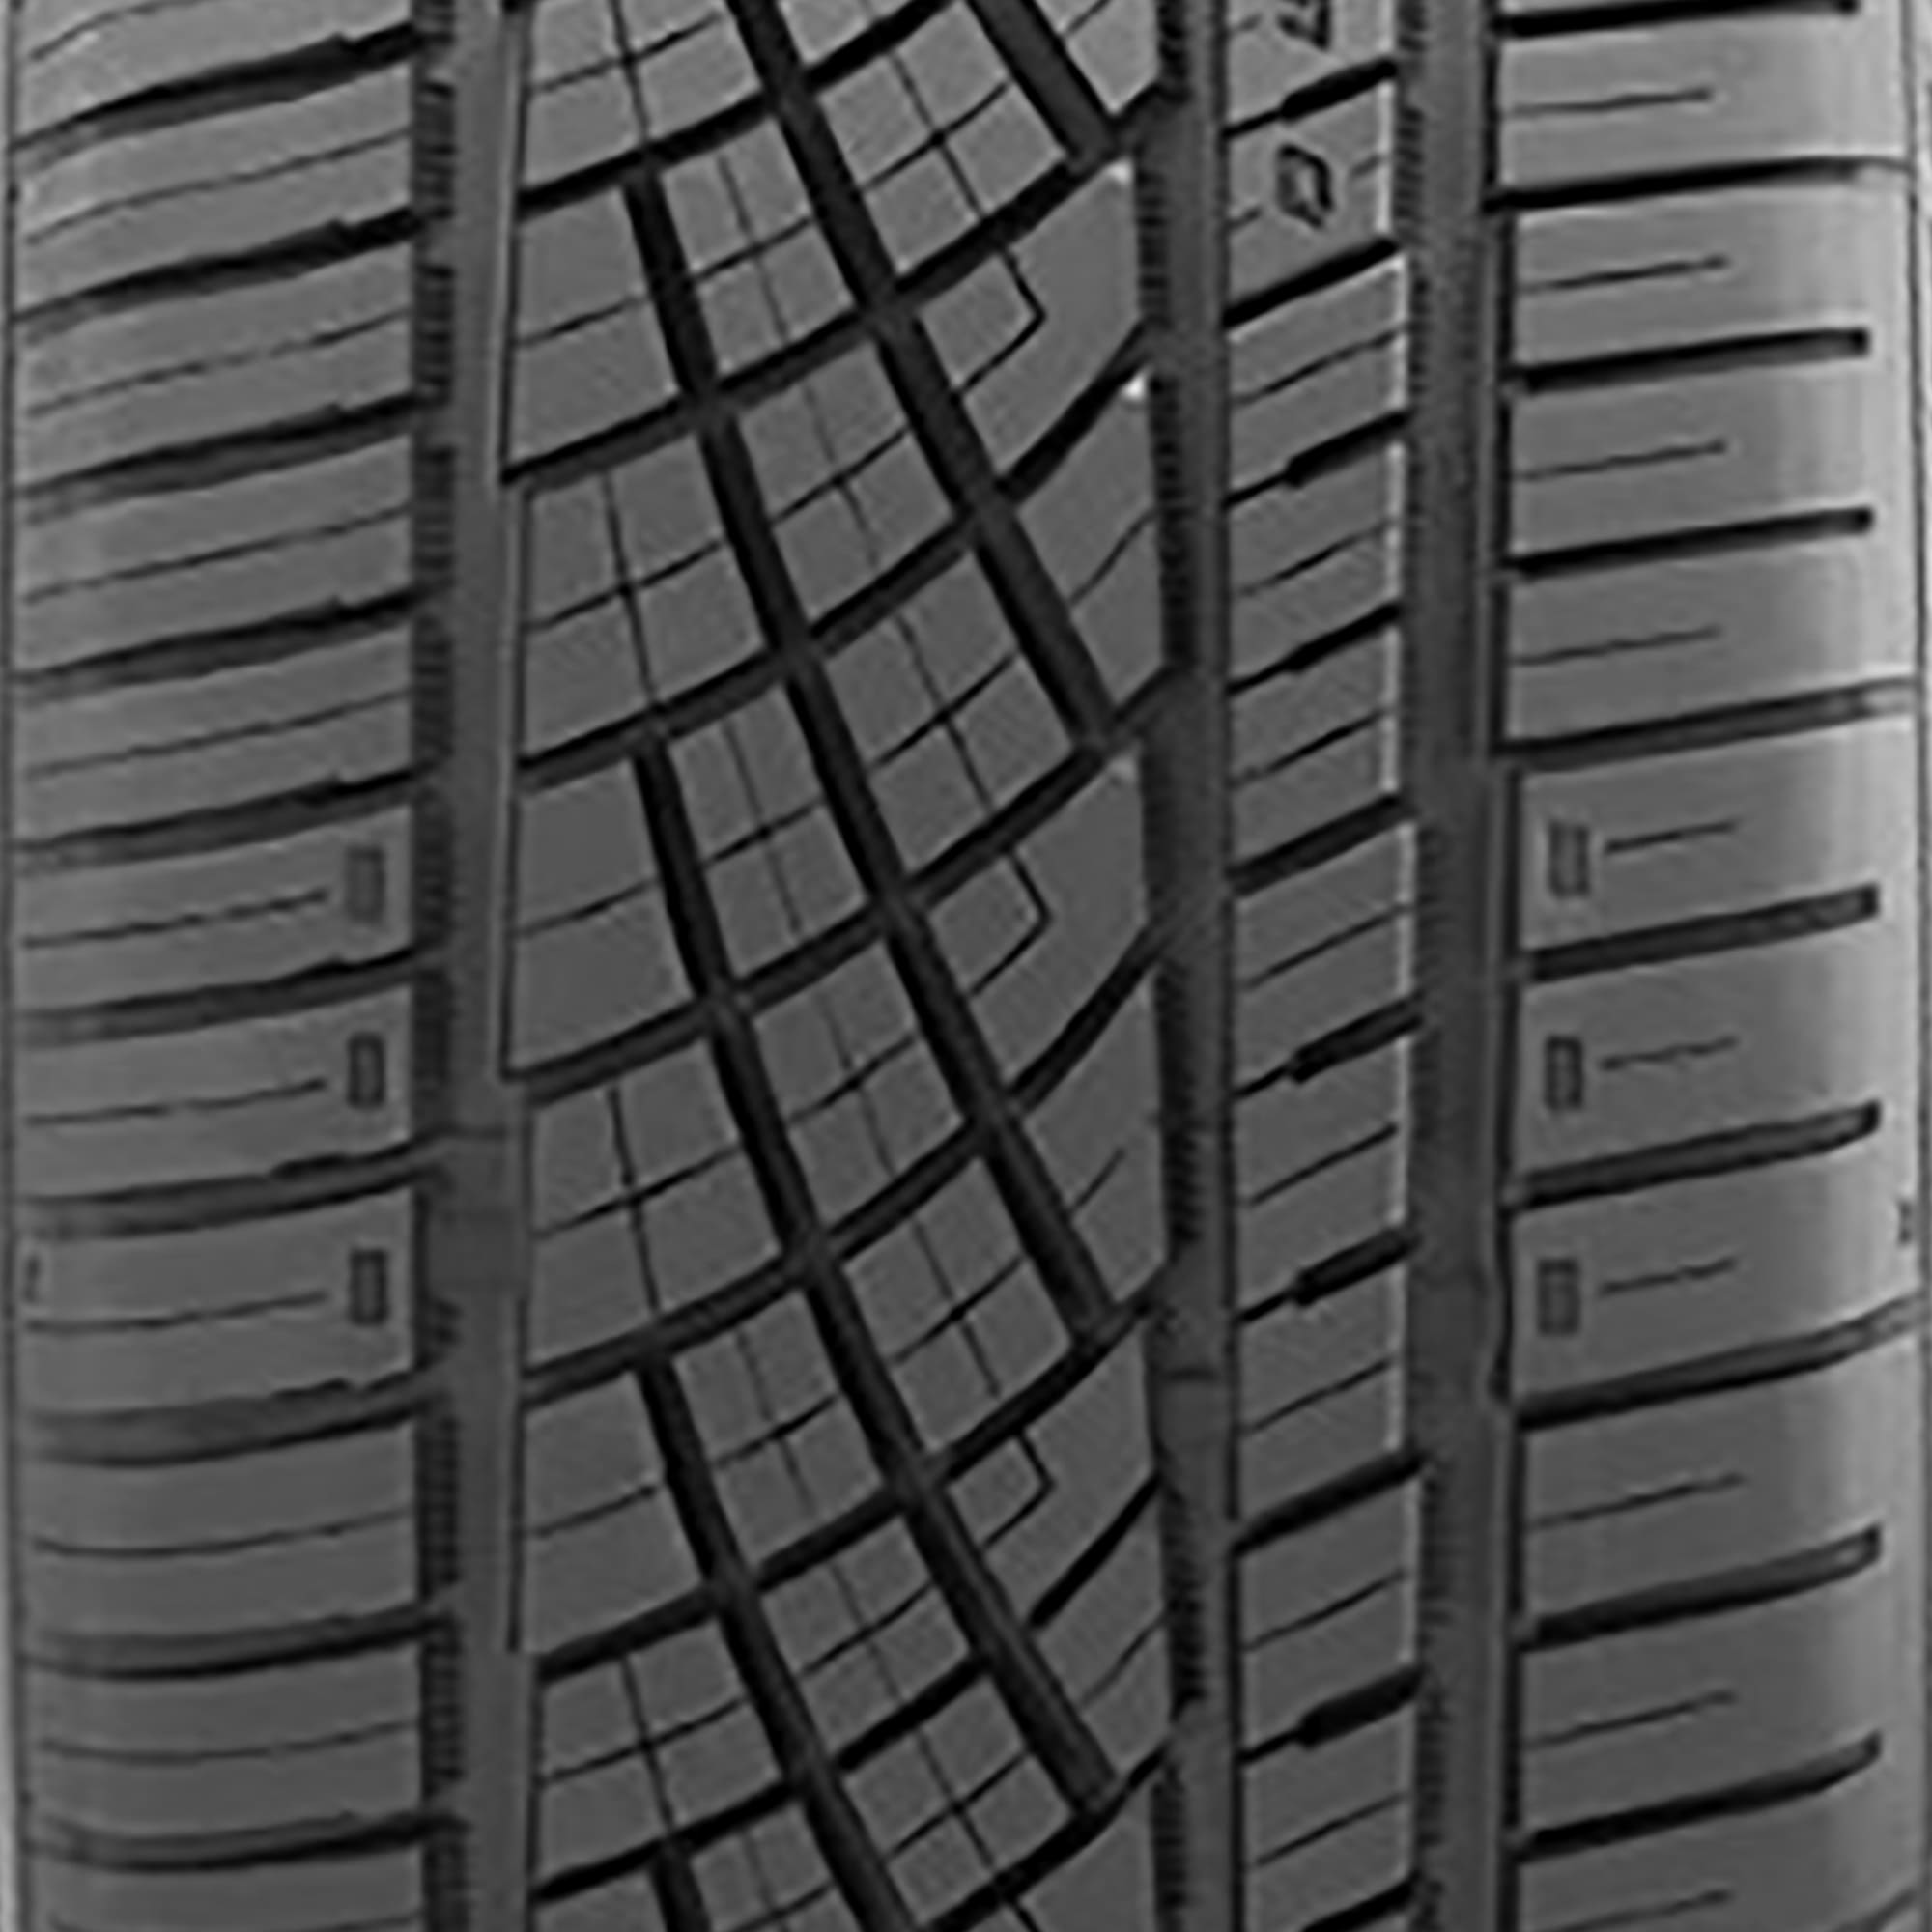 Continental ExtremeContact DWS06 UHP All Season 245/40ZR19 98Y XL Passenger  Tire